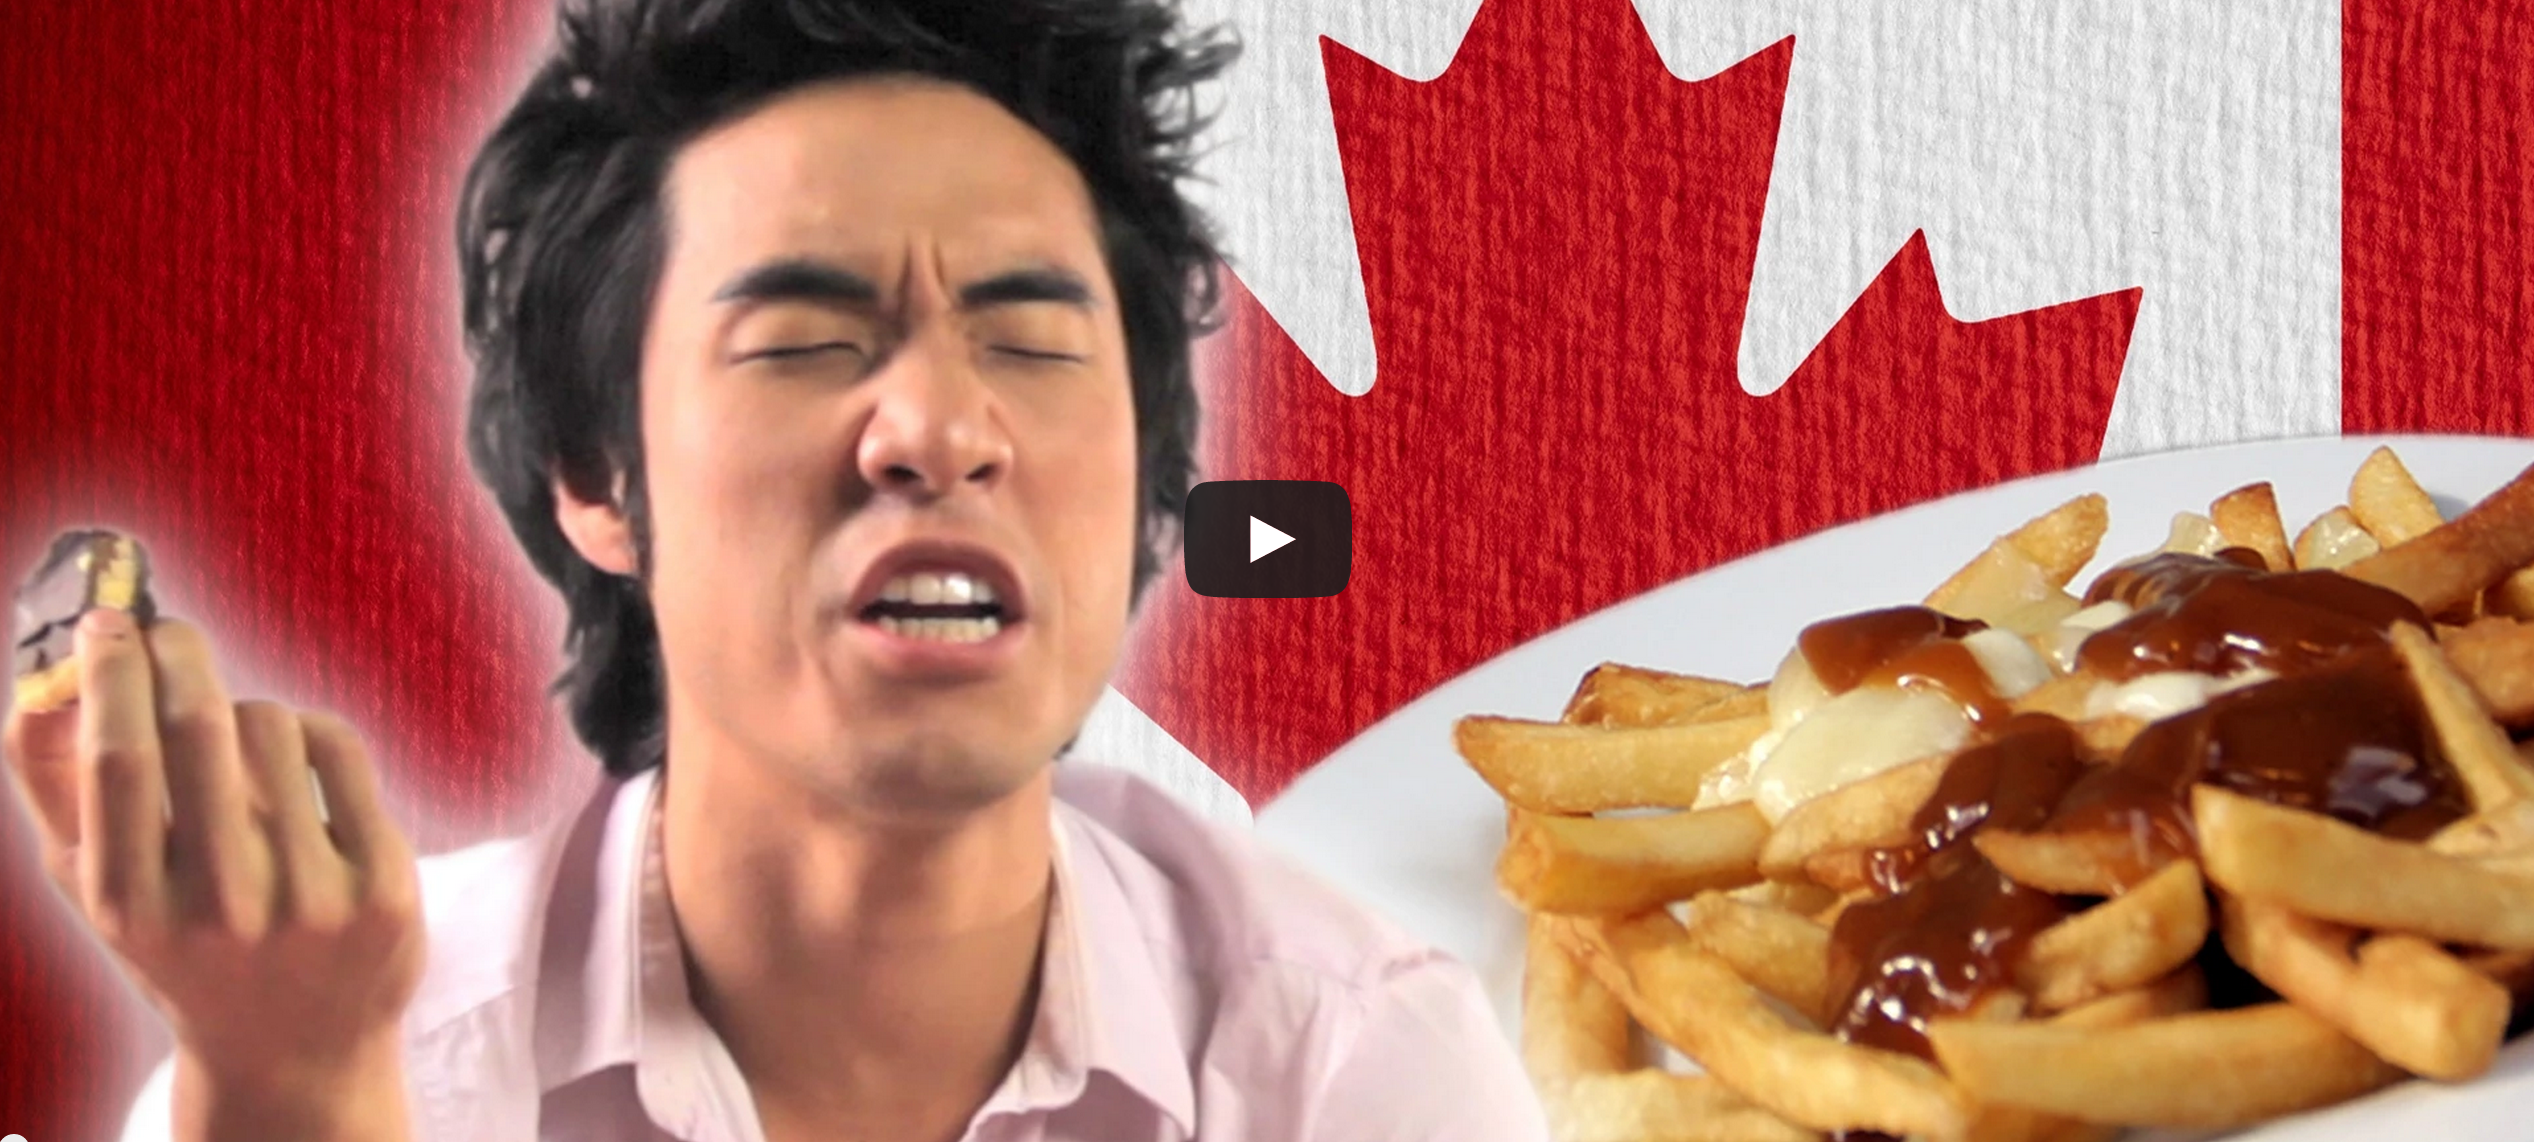 American’s Trying Canadian Snacks For First Time